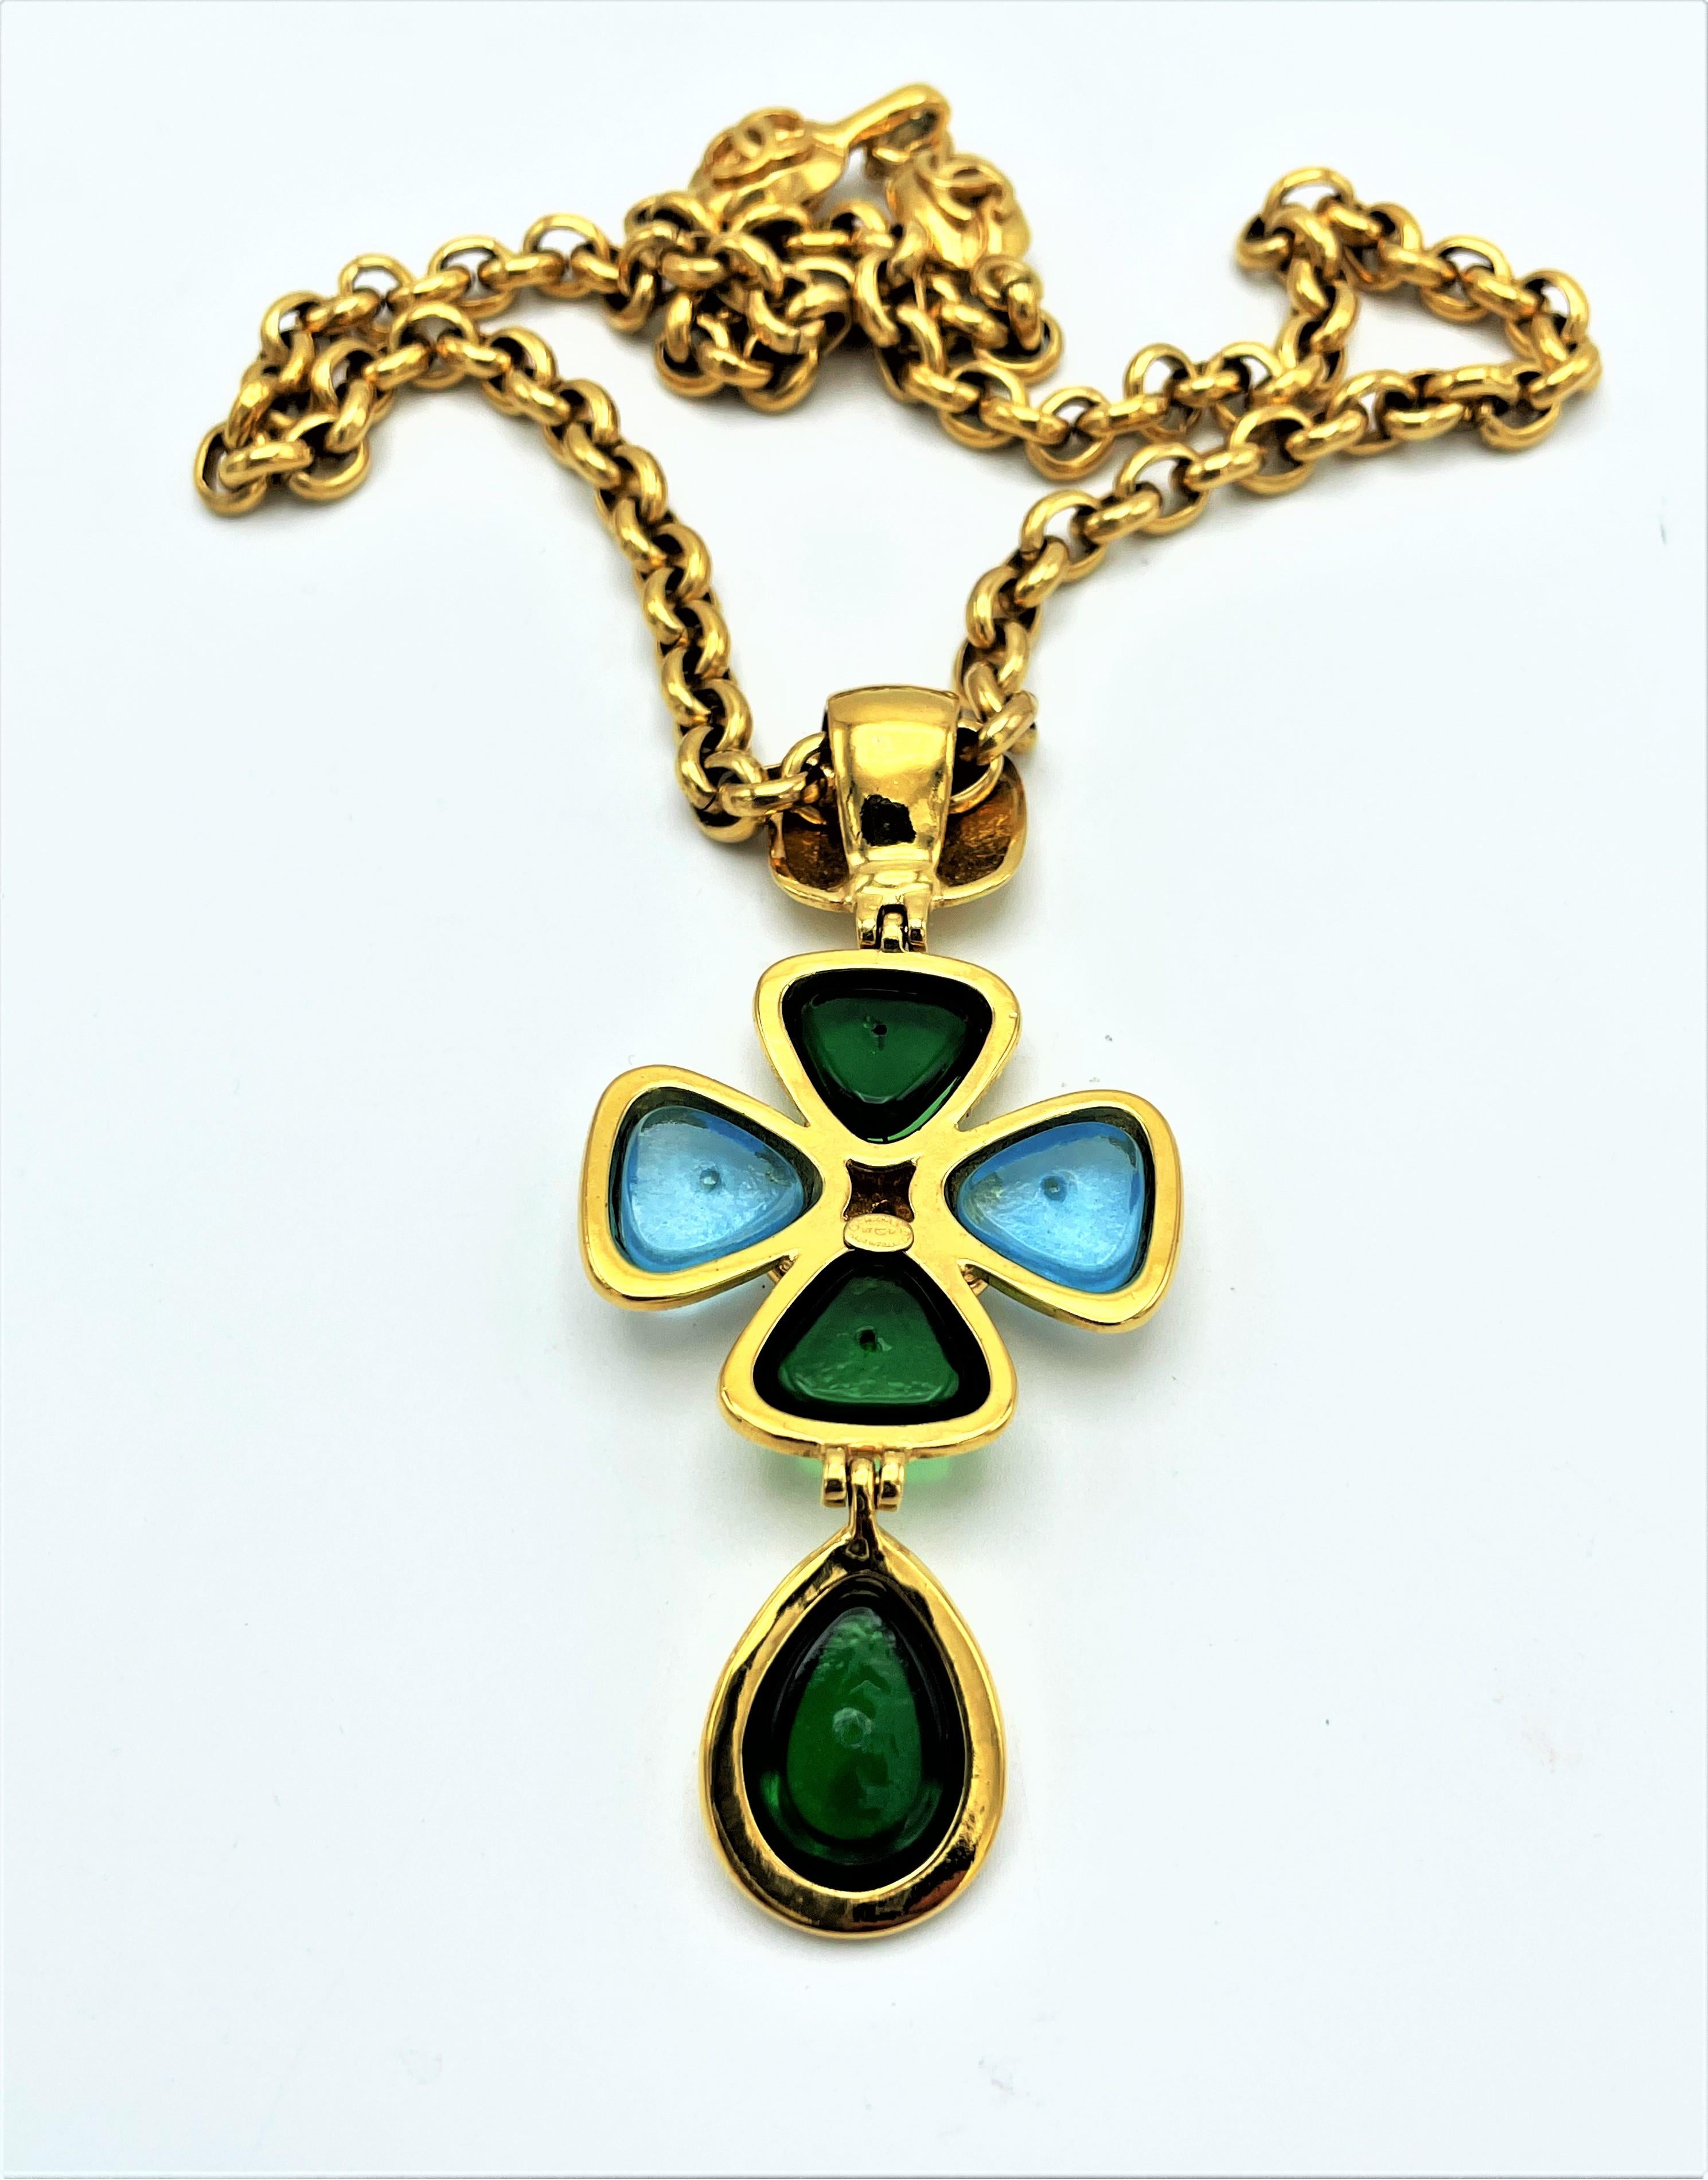 Vintage Chanel link chain with cross pendant filled with Gripoix glass, 1997  2